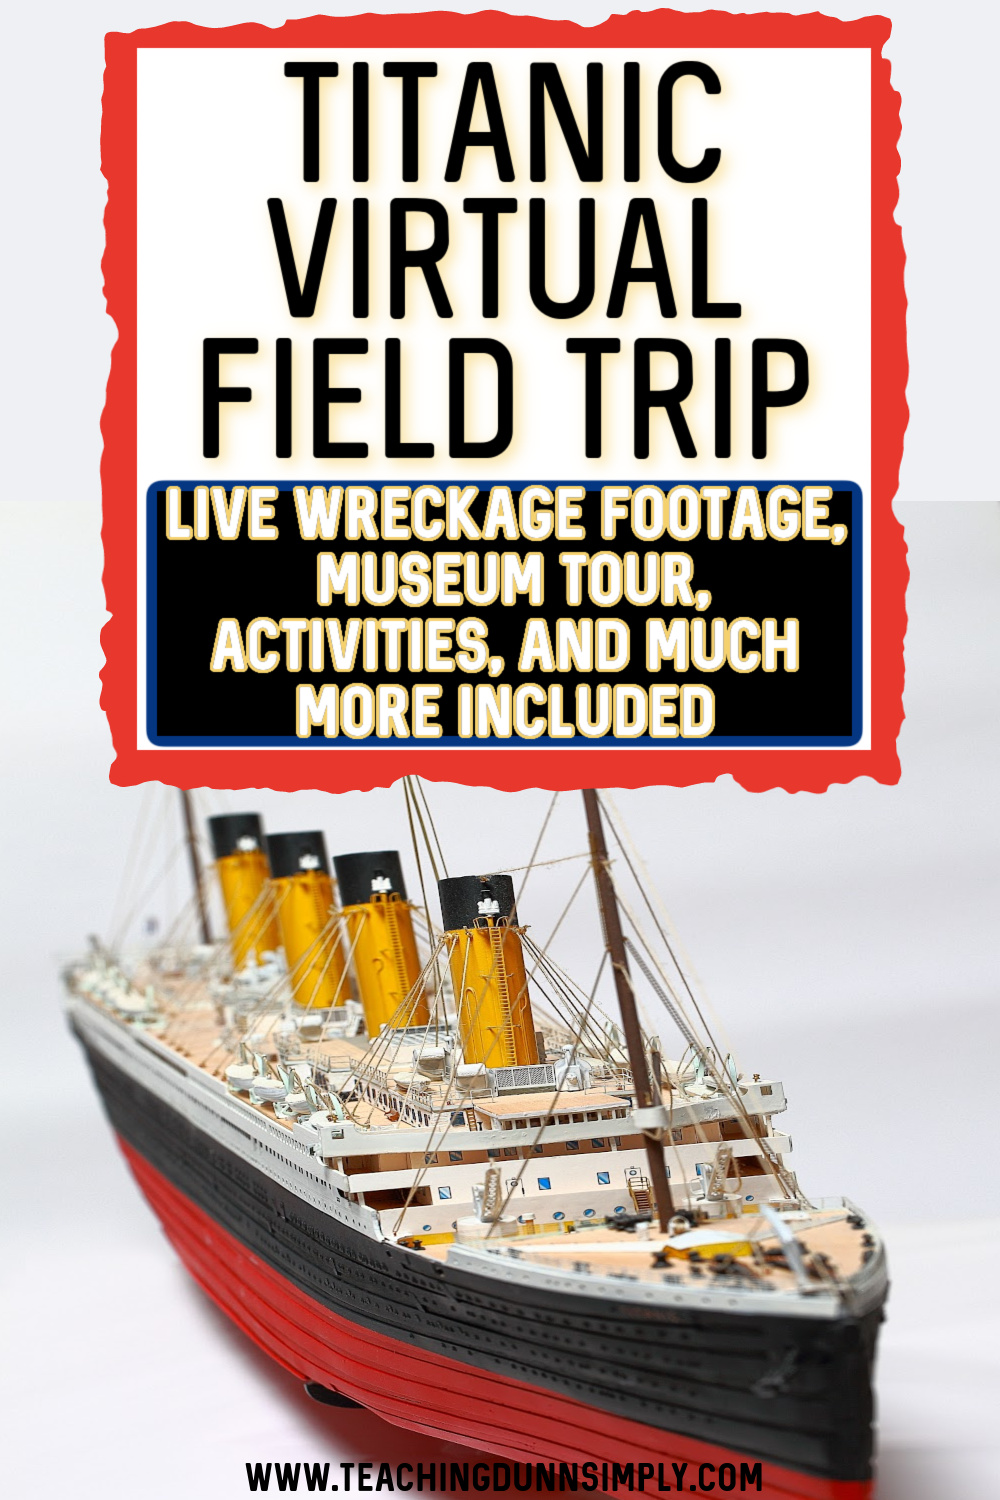 Titanic Virtual Field Trip is a great learning experience. Jammed packed with activities and information a Virtual Field Trip Titanic is fun and educational.